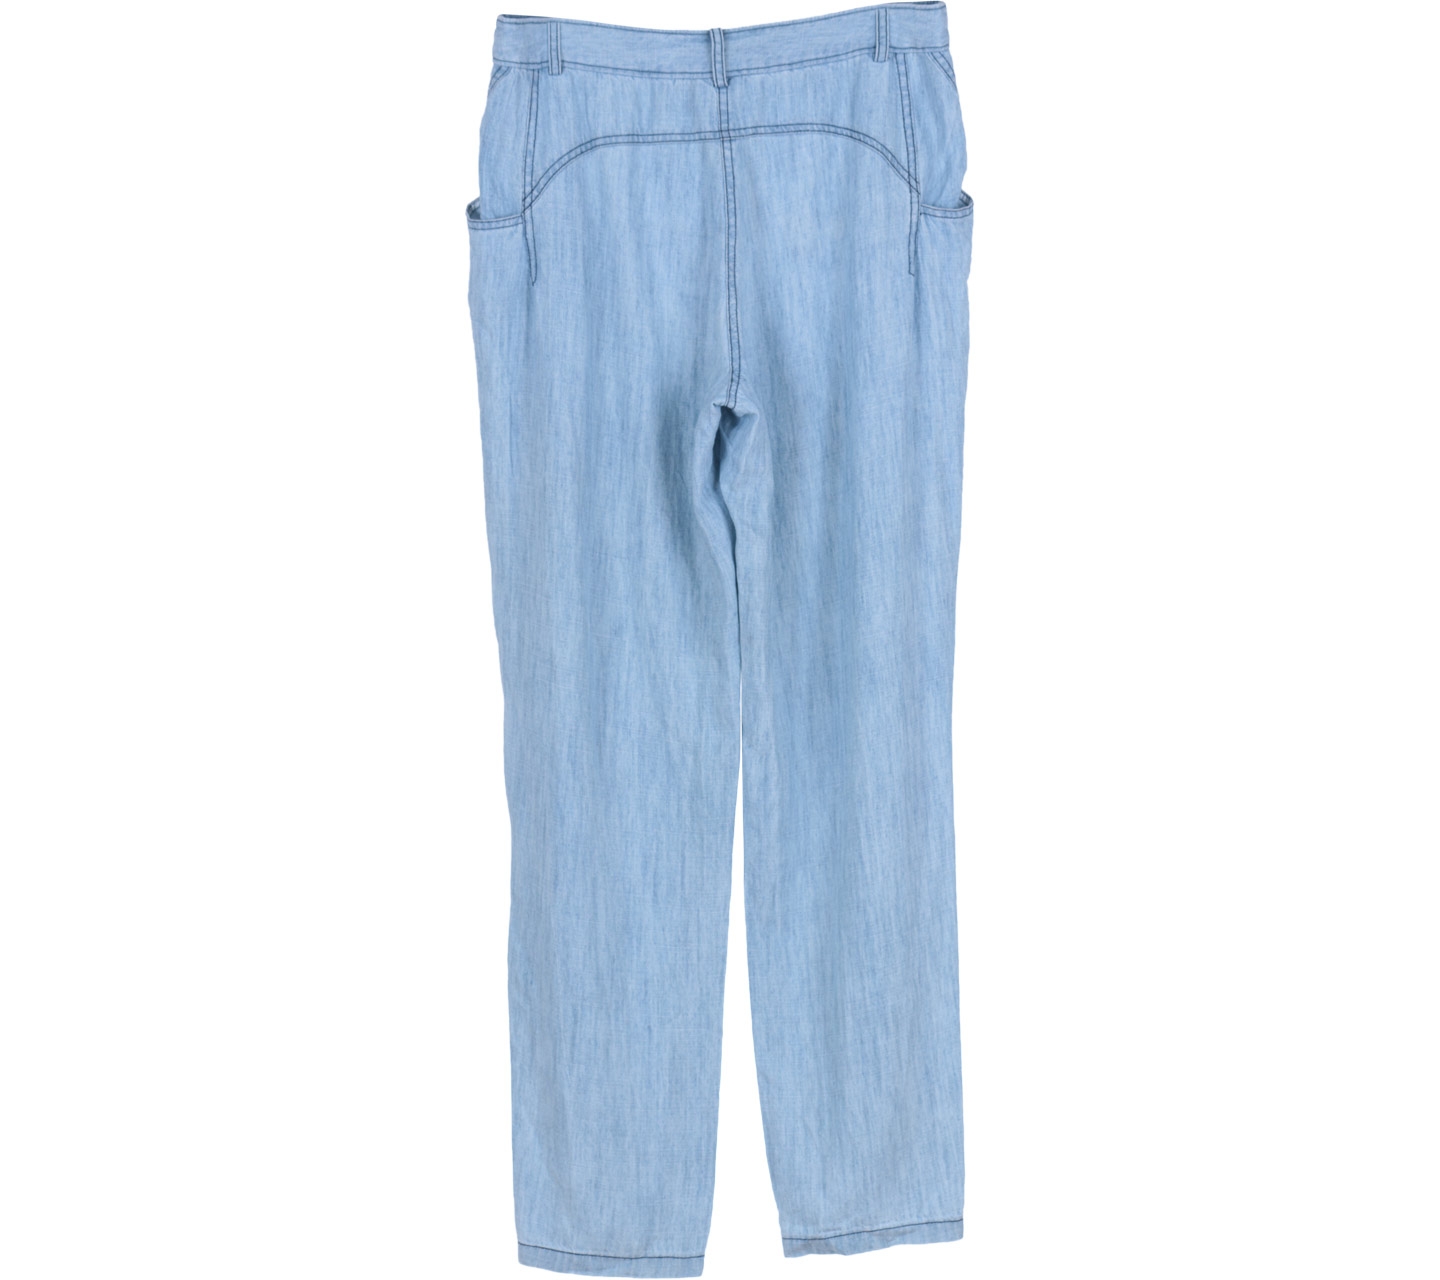 iRoo Blue Washed Jeans Pants